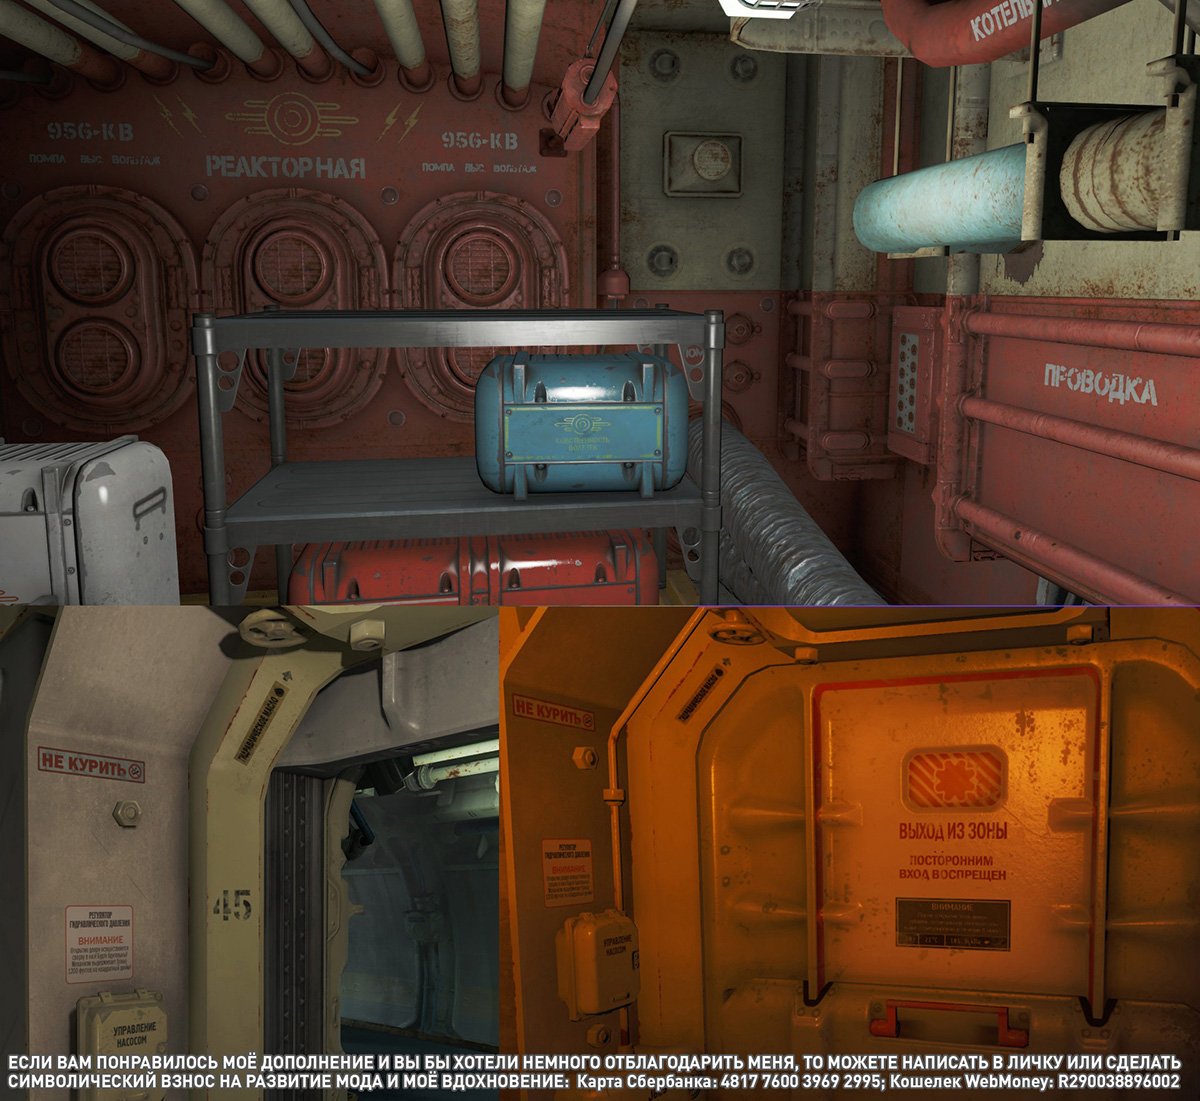 Generator textures from hiro fallout 4 фото 20